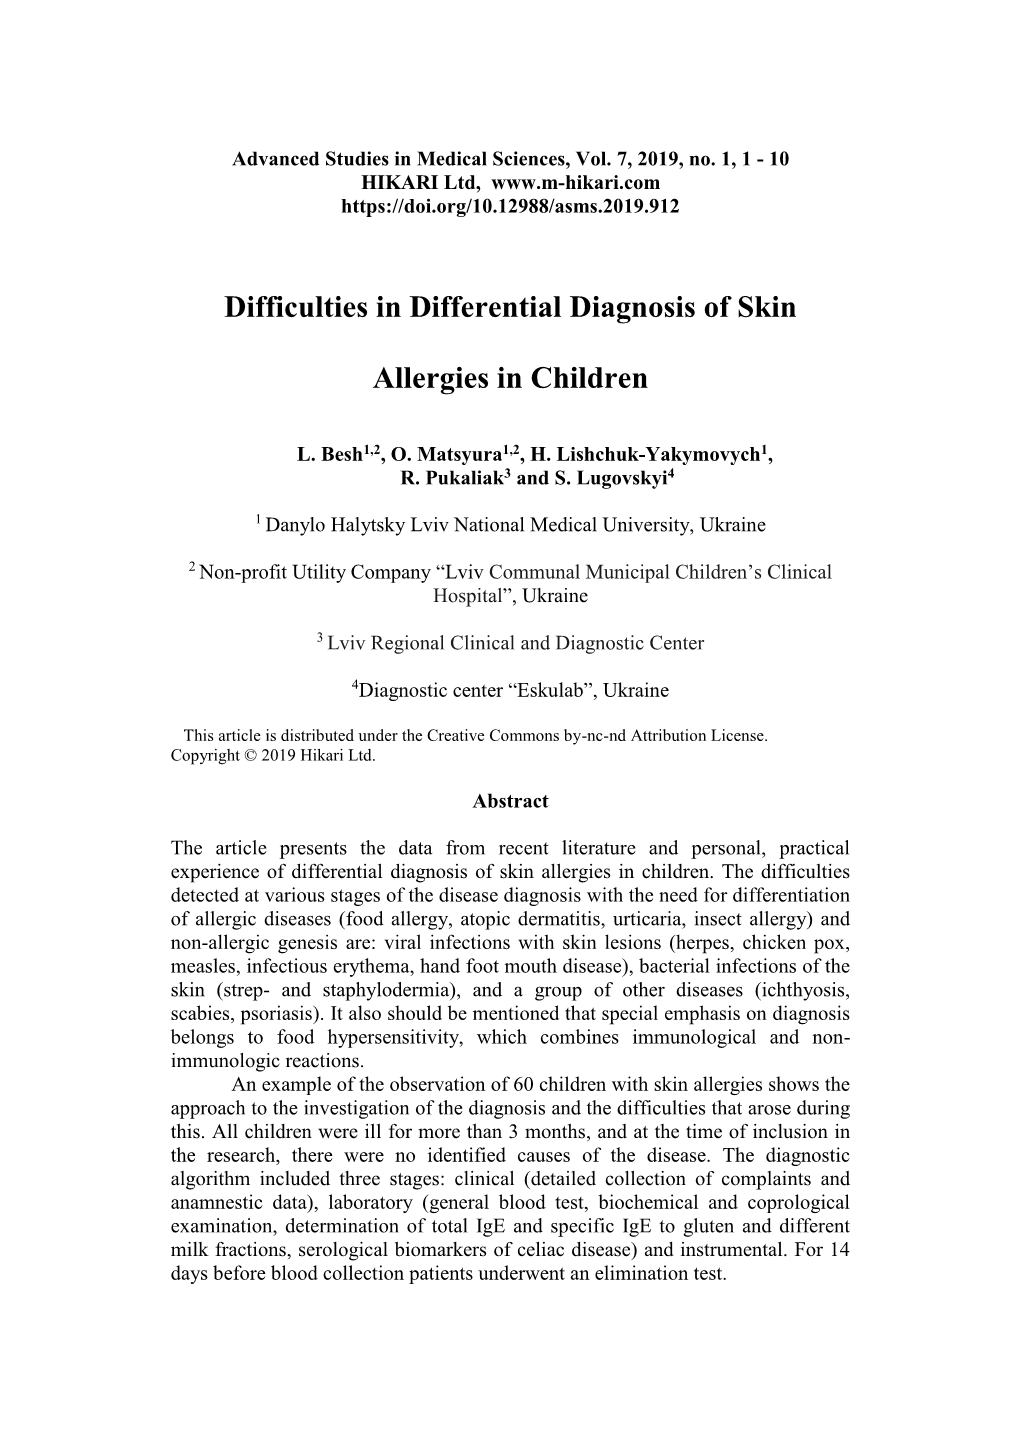 Difficulties in Differential Diagnosis of Skin Allergies in Children 3